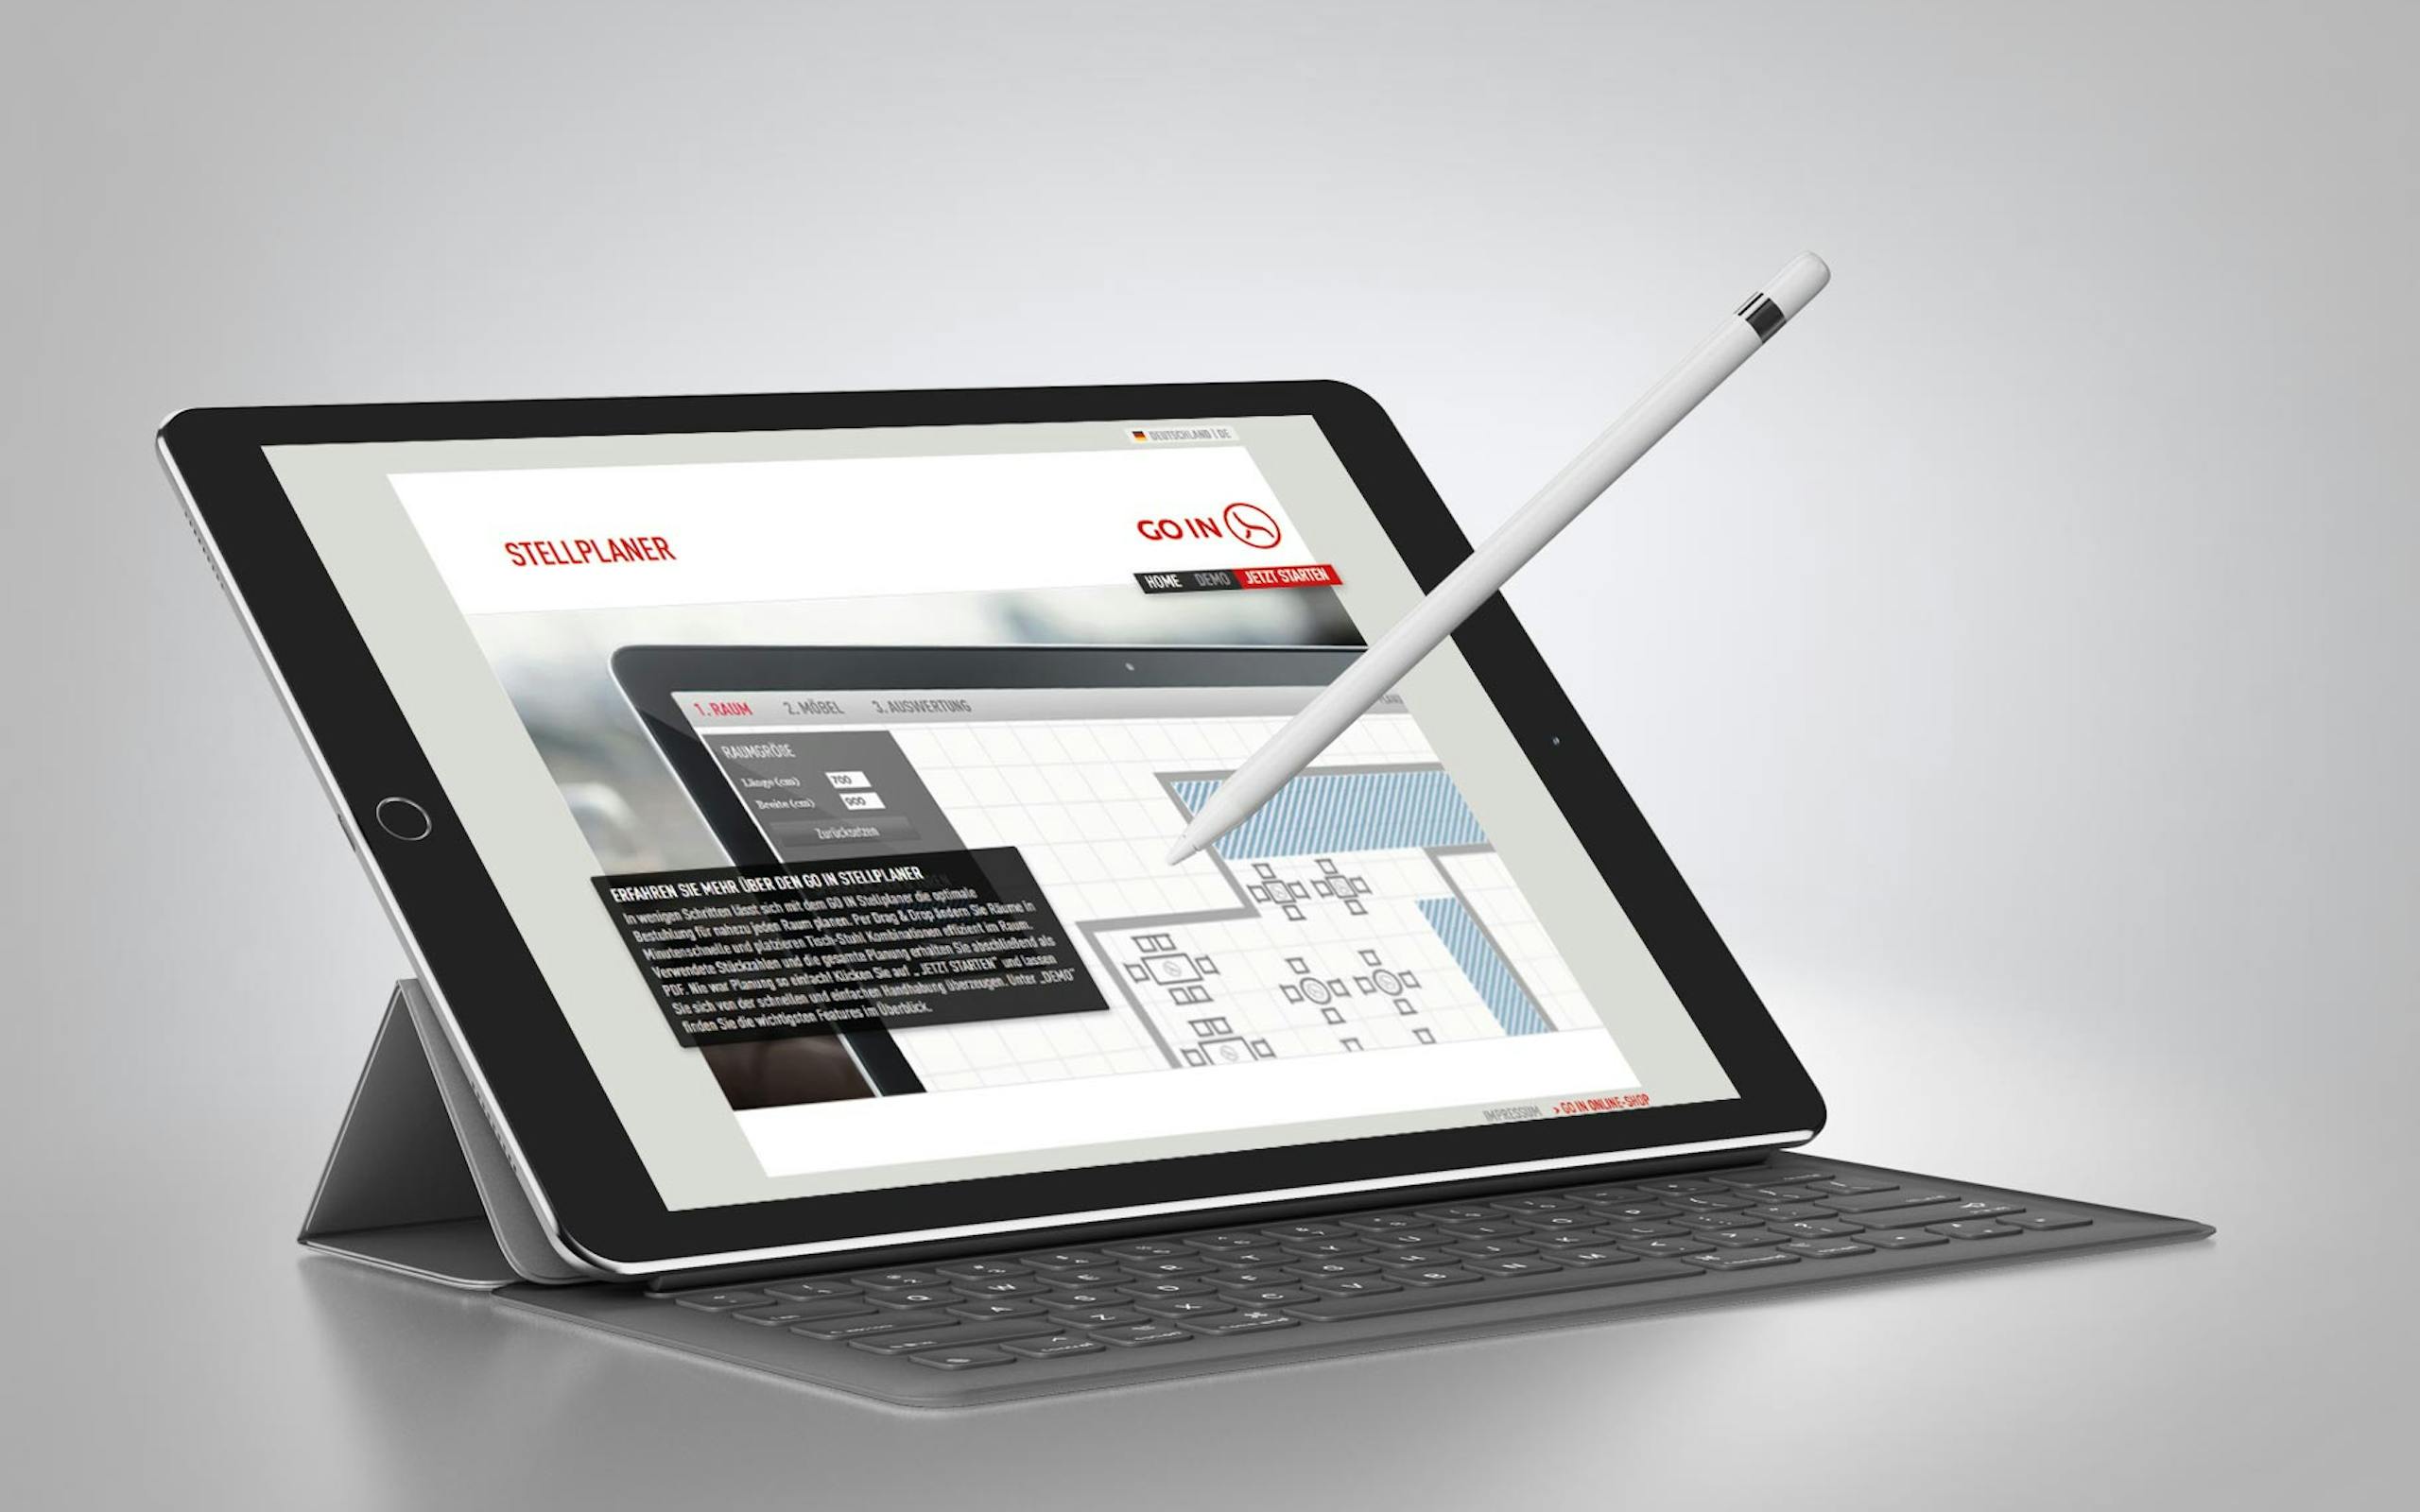 A tablet shows the web tool "Stellplaner" from Go, it is a product configurator.